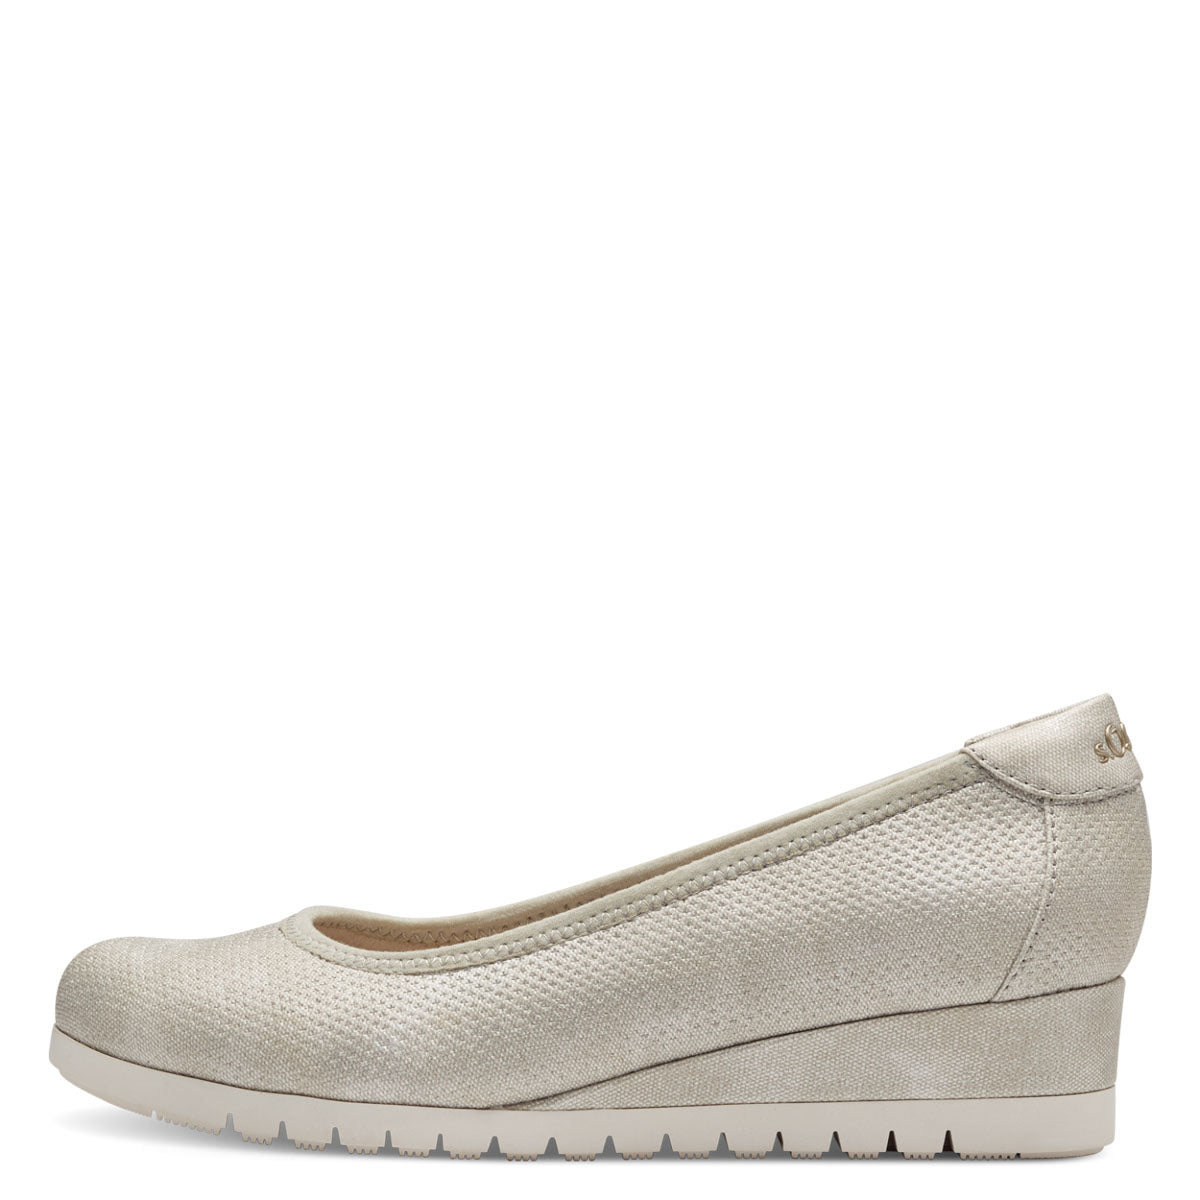 Front view of S.Oliver Beige Wedge Ballerina Pumps showcasing the rounded toe and perforated upper.